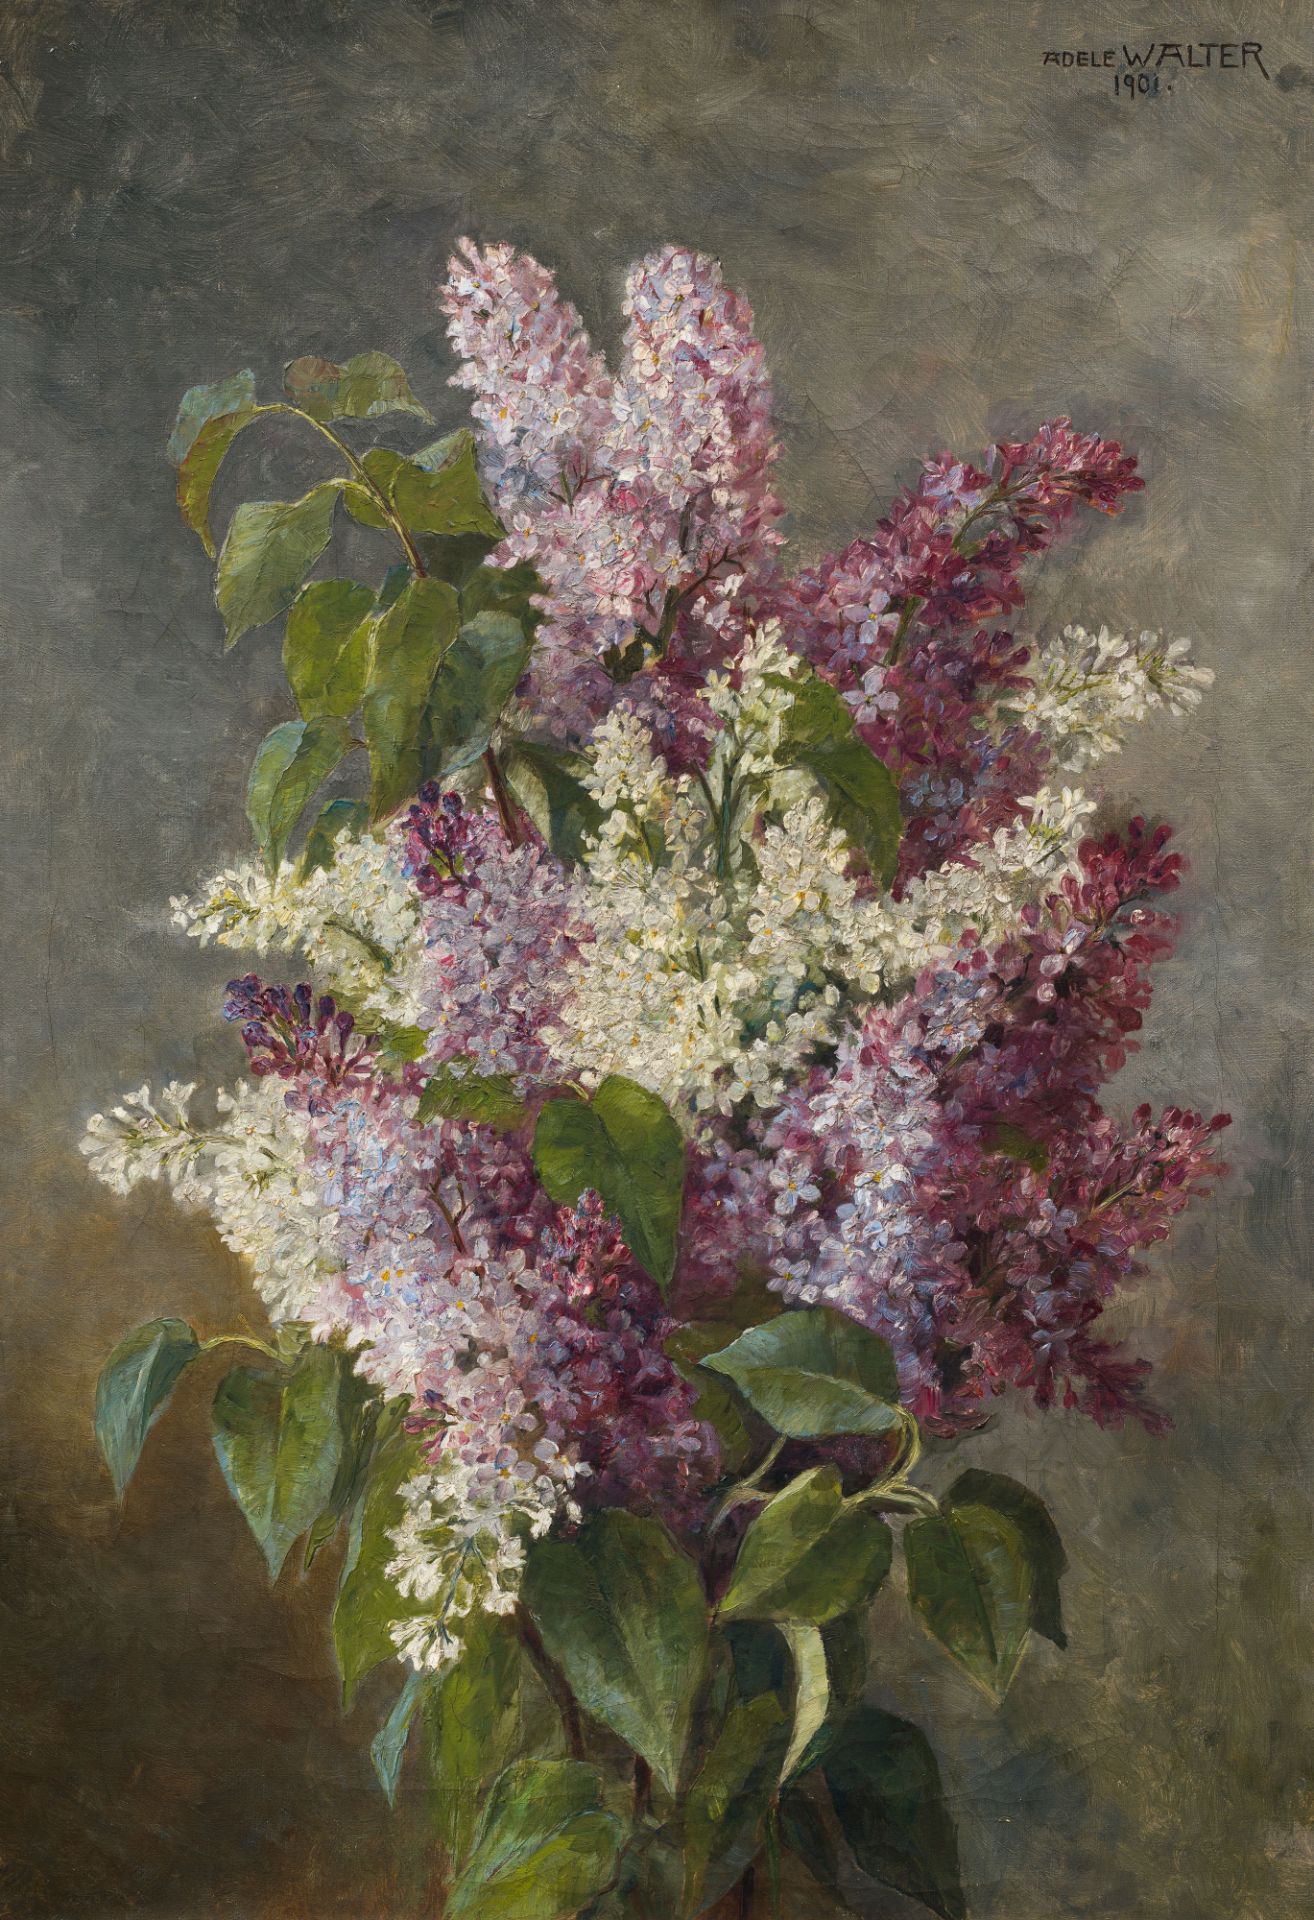 Adele Walter: Lilac bouquet